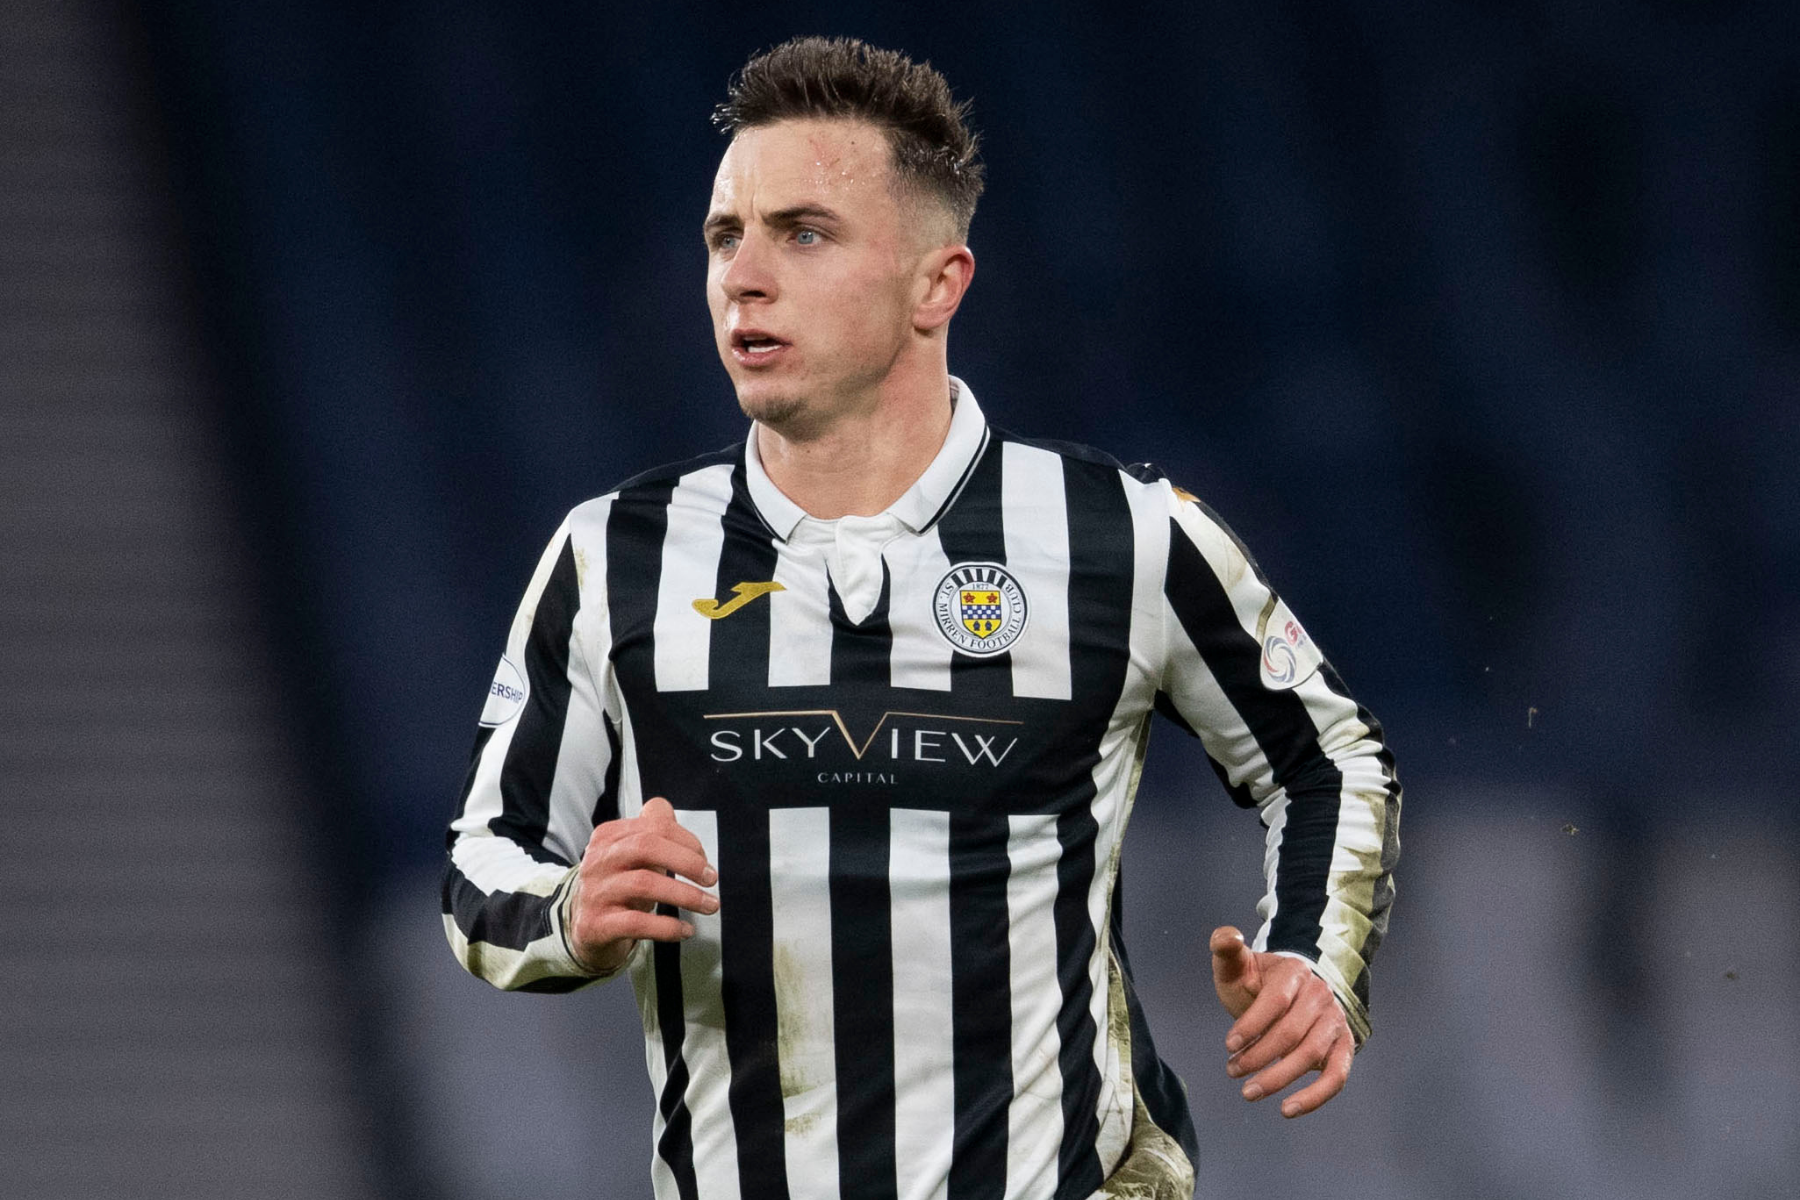 Eamonn Brophy opens up on injury hell as he targets comeback season for St Mirren